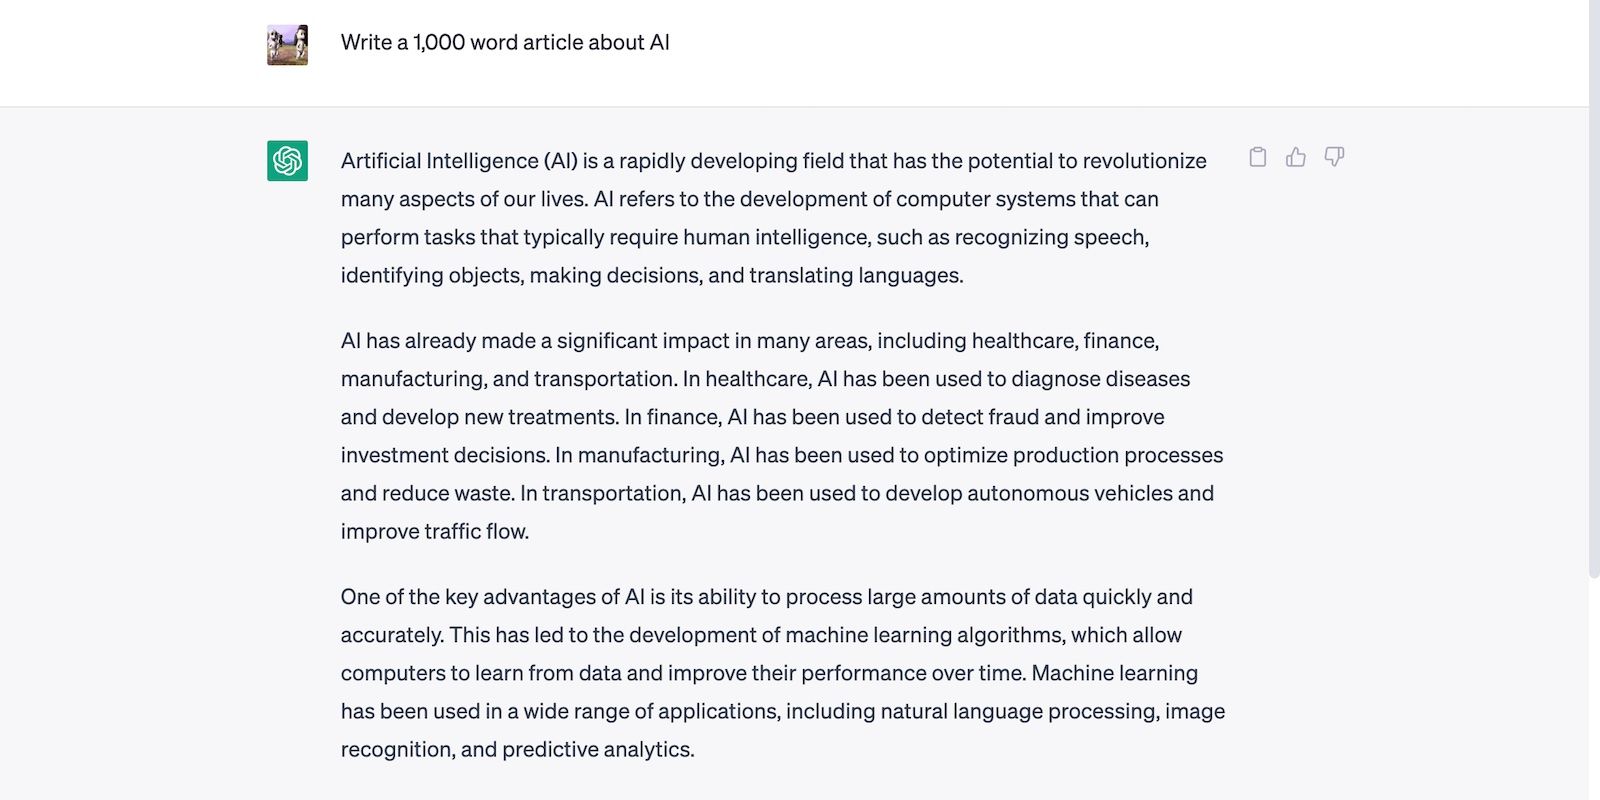 Ask ChatGPT to write a 1,000-word article about AI